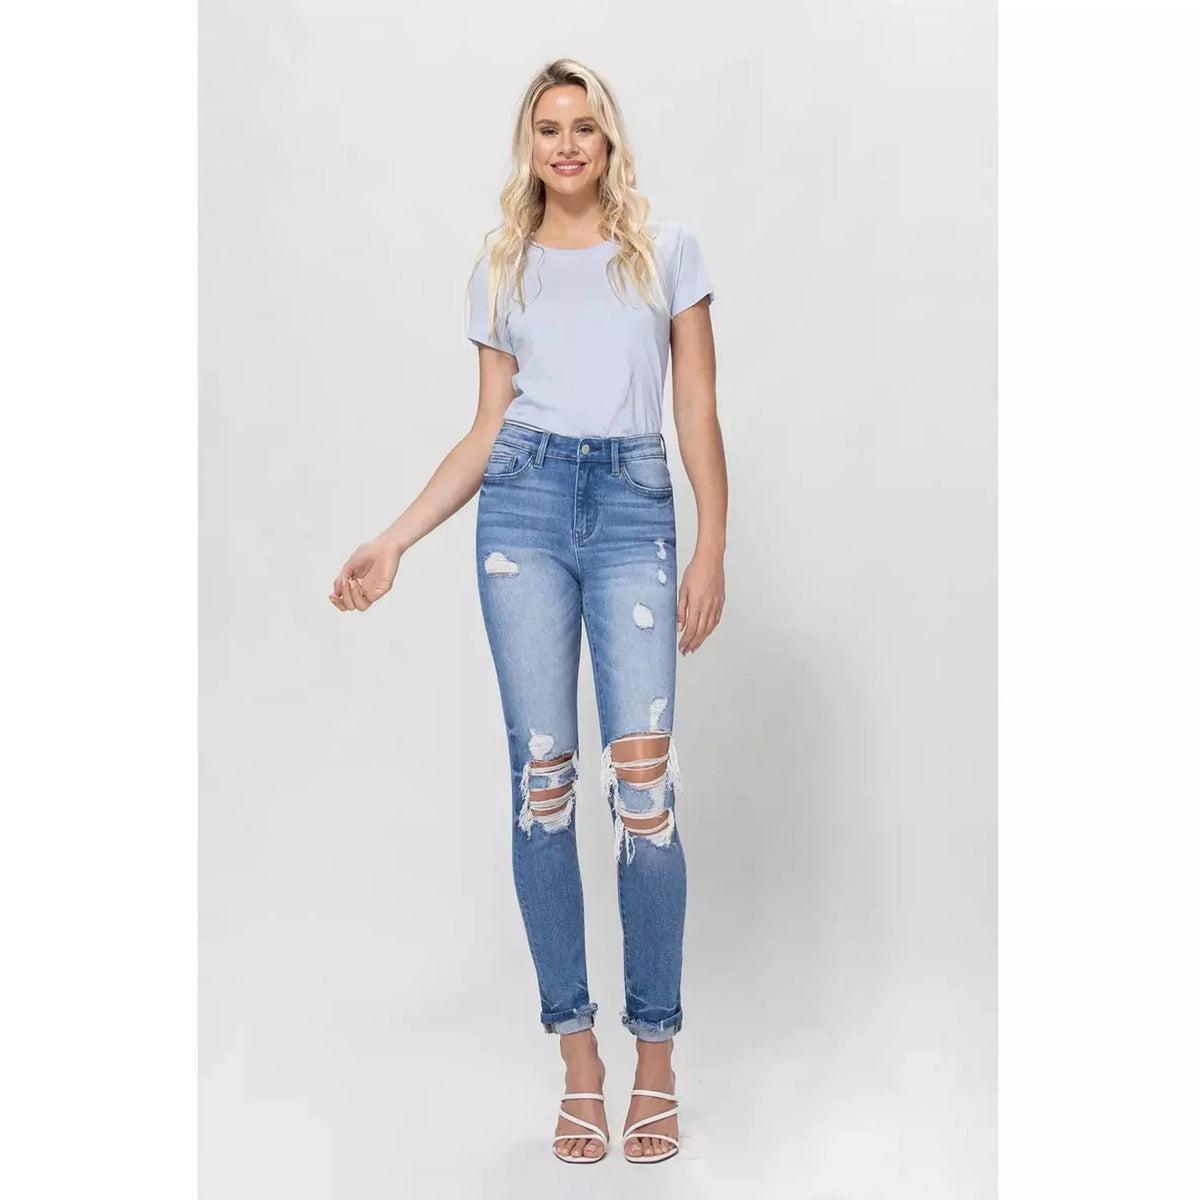 High-Rise Skinny Single Cuff - SLATE Boutique & Gifts